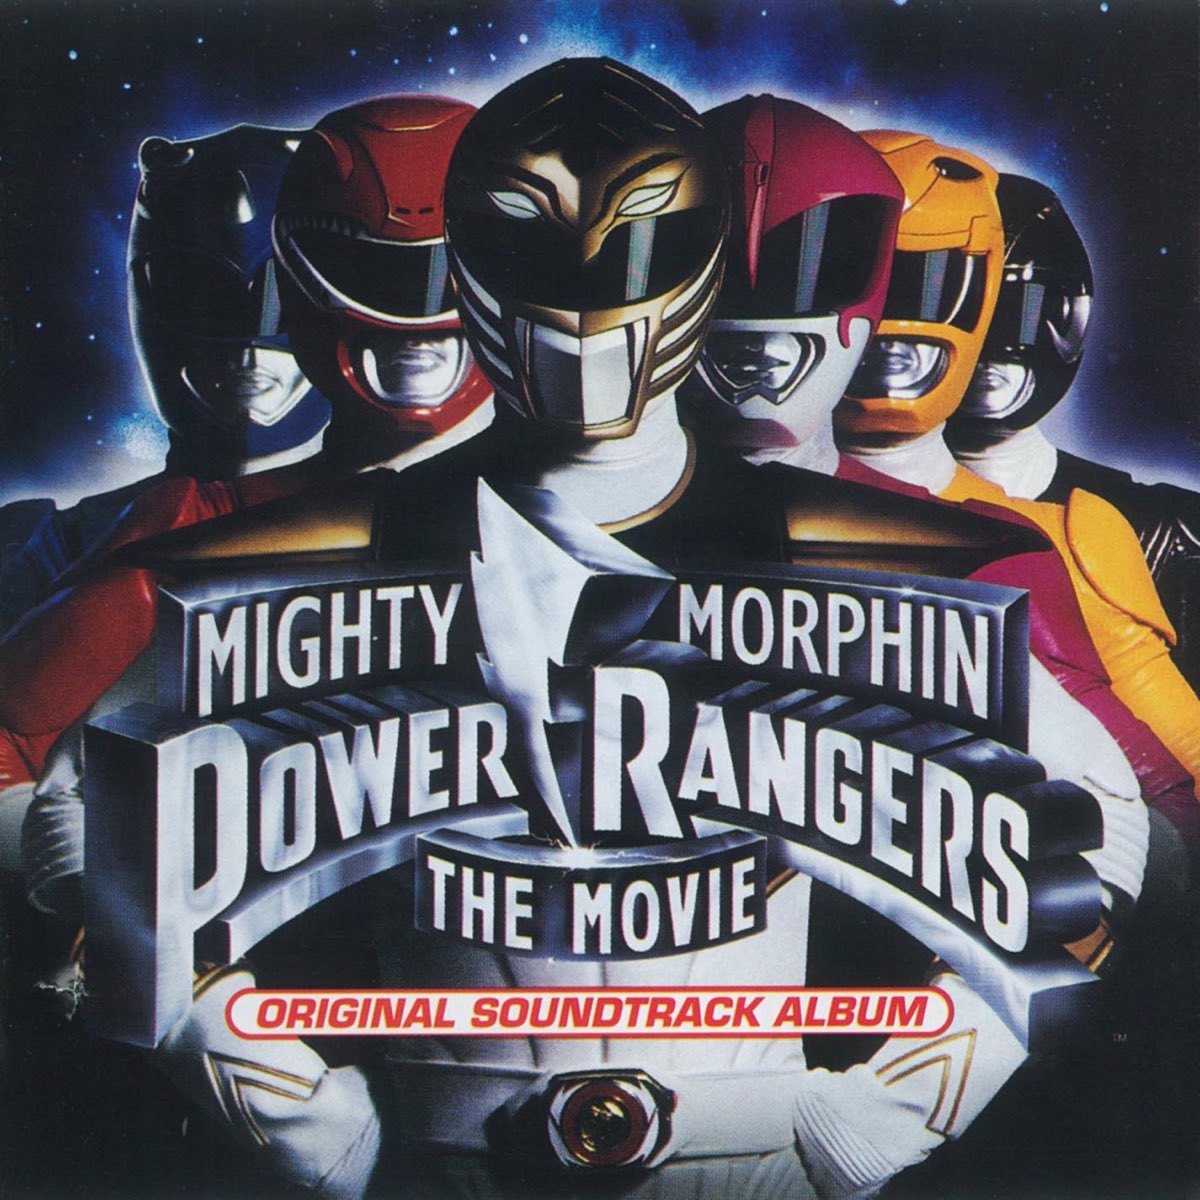 Mighty Morphin Power Rangers: The Movie (Original Soundtrack Album) by  Various Artists on iTunes